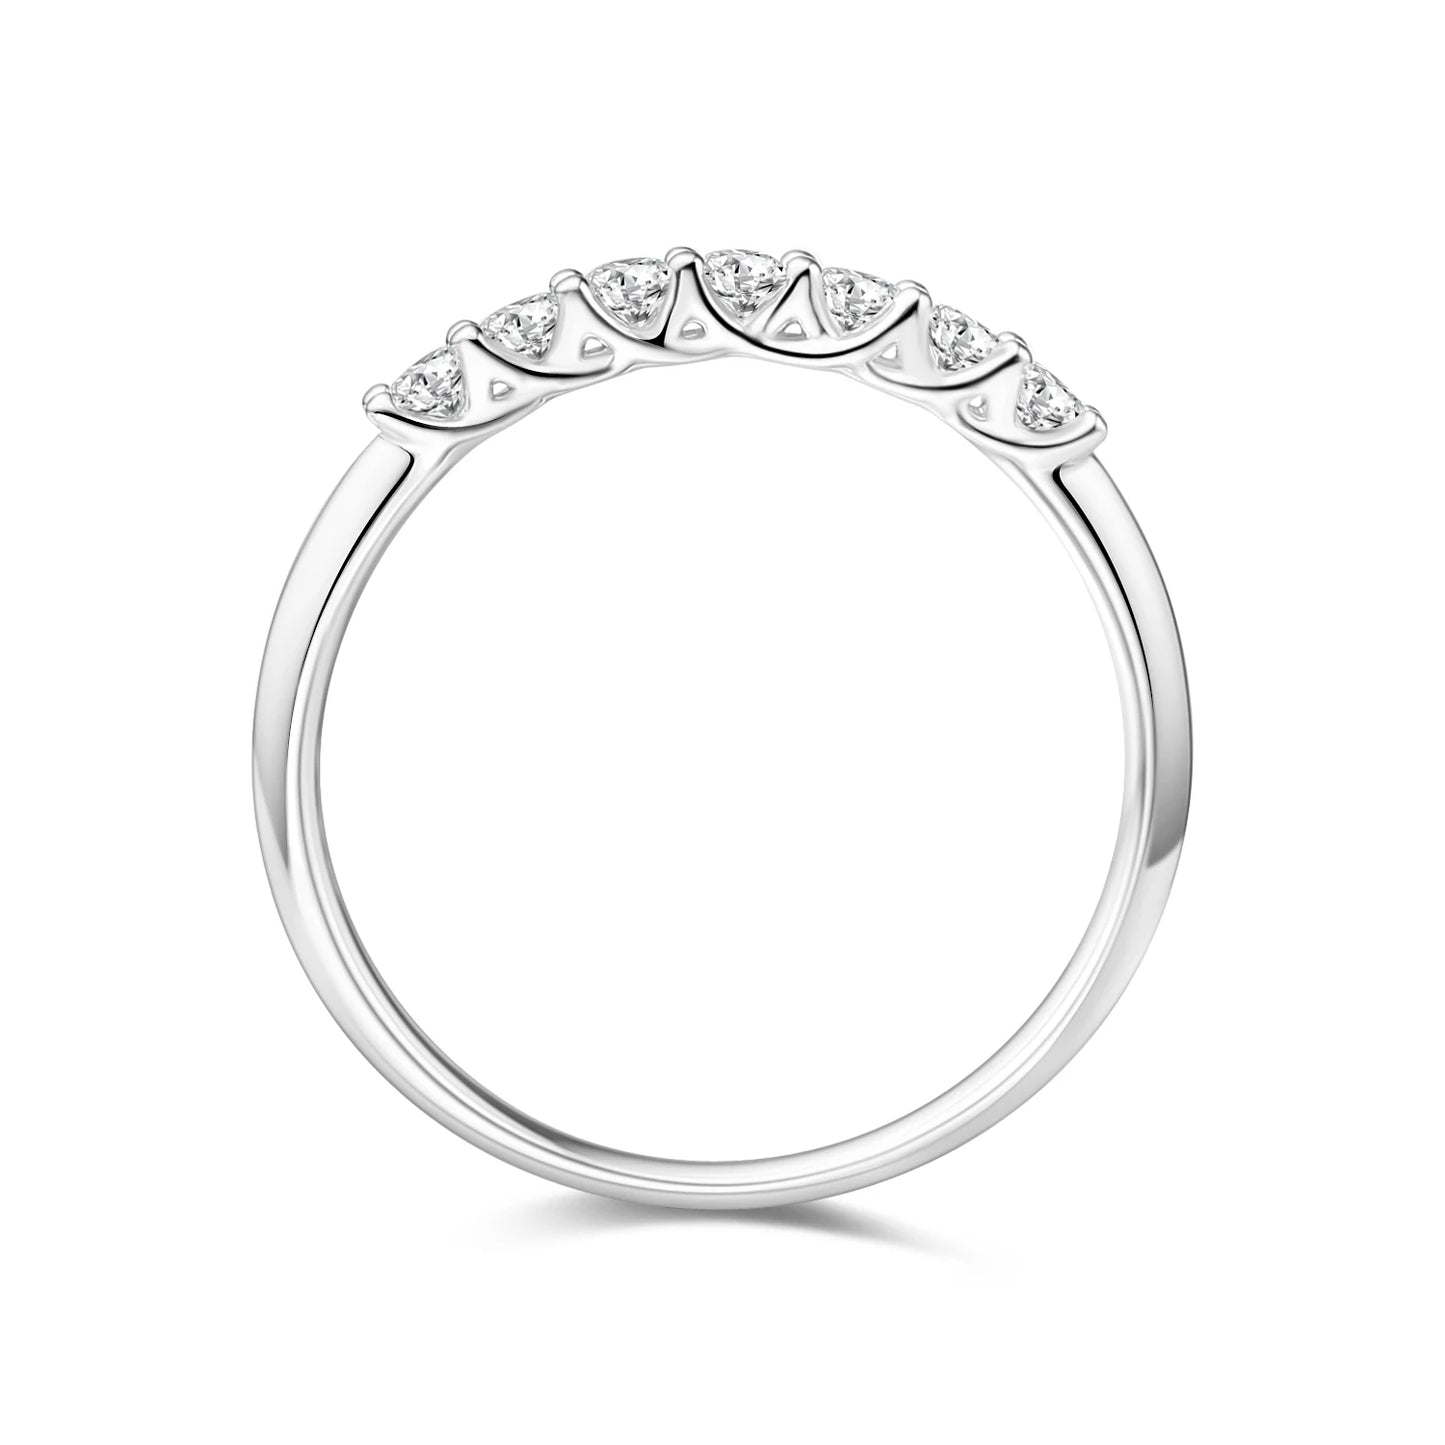 0.21ct Diamond Ring in 18K Solid White Gold